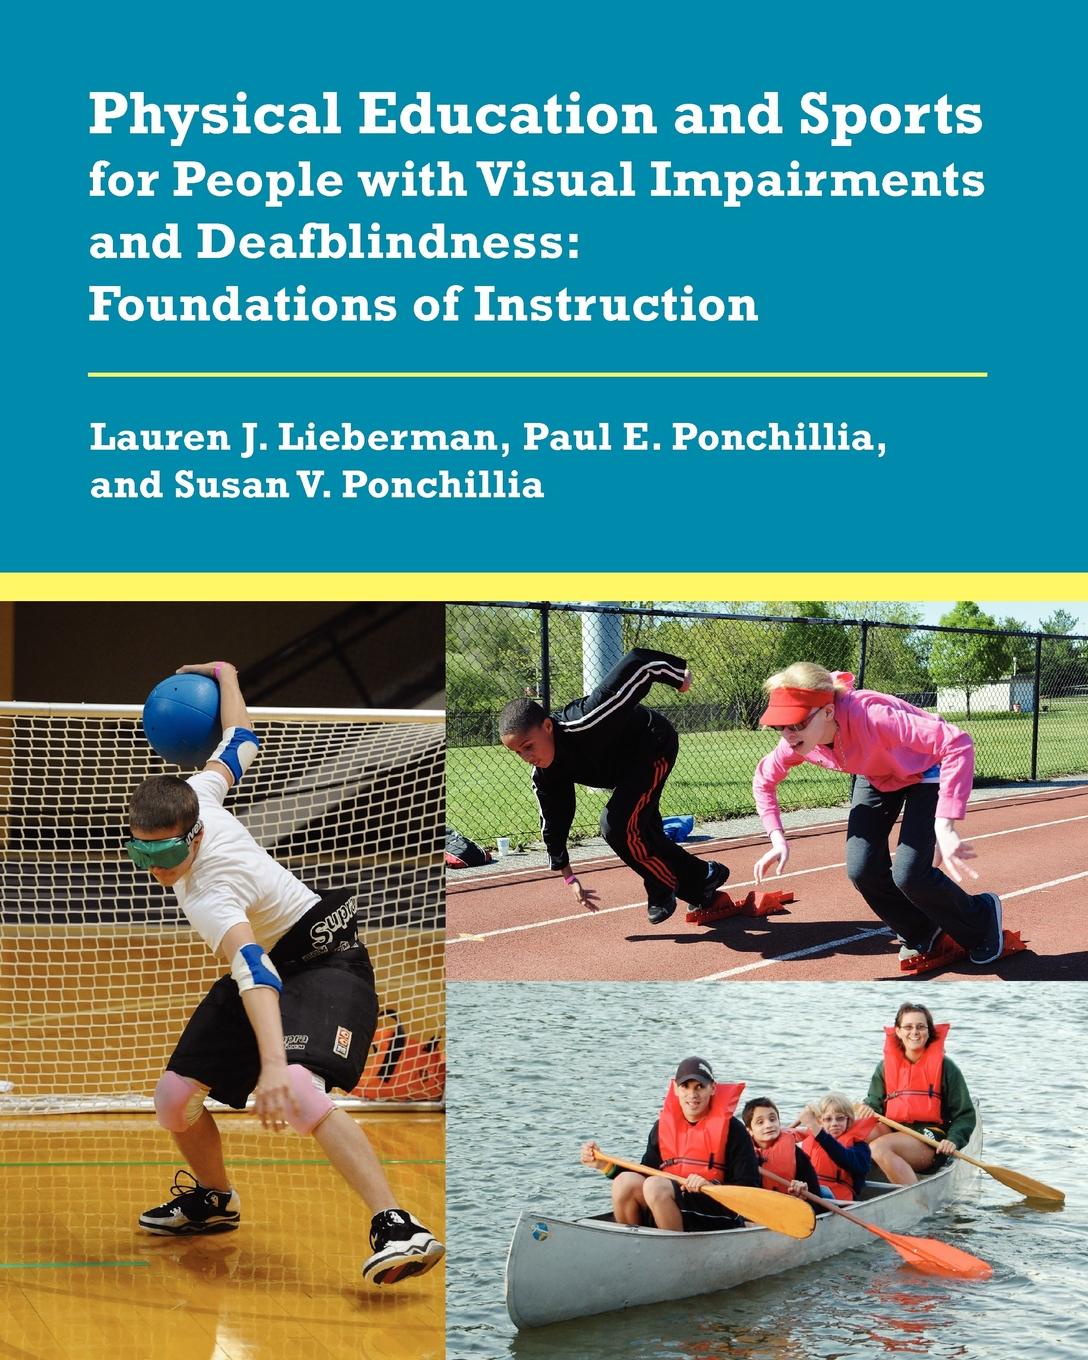 Physical Education and Sports for People with Visual Impairments and Deafblindness. Foundations of Instruction